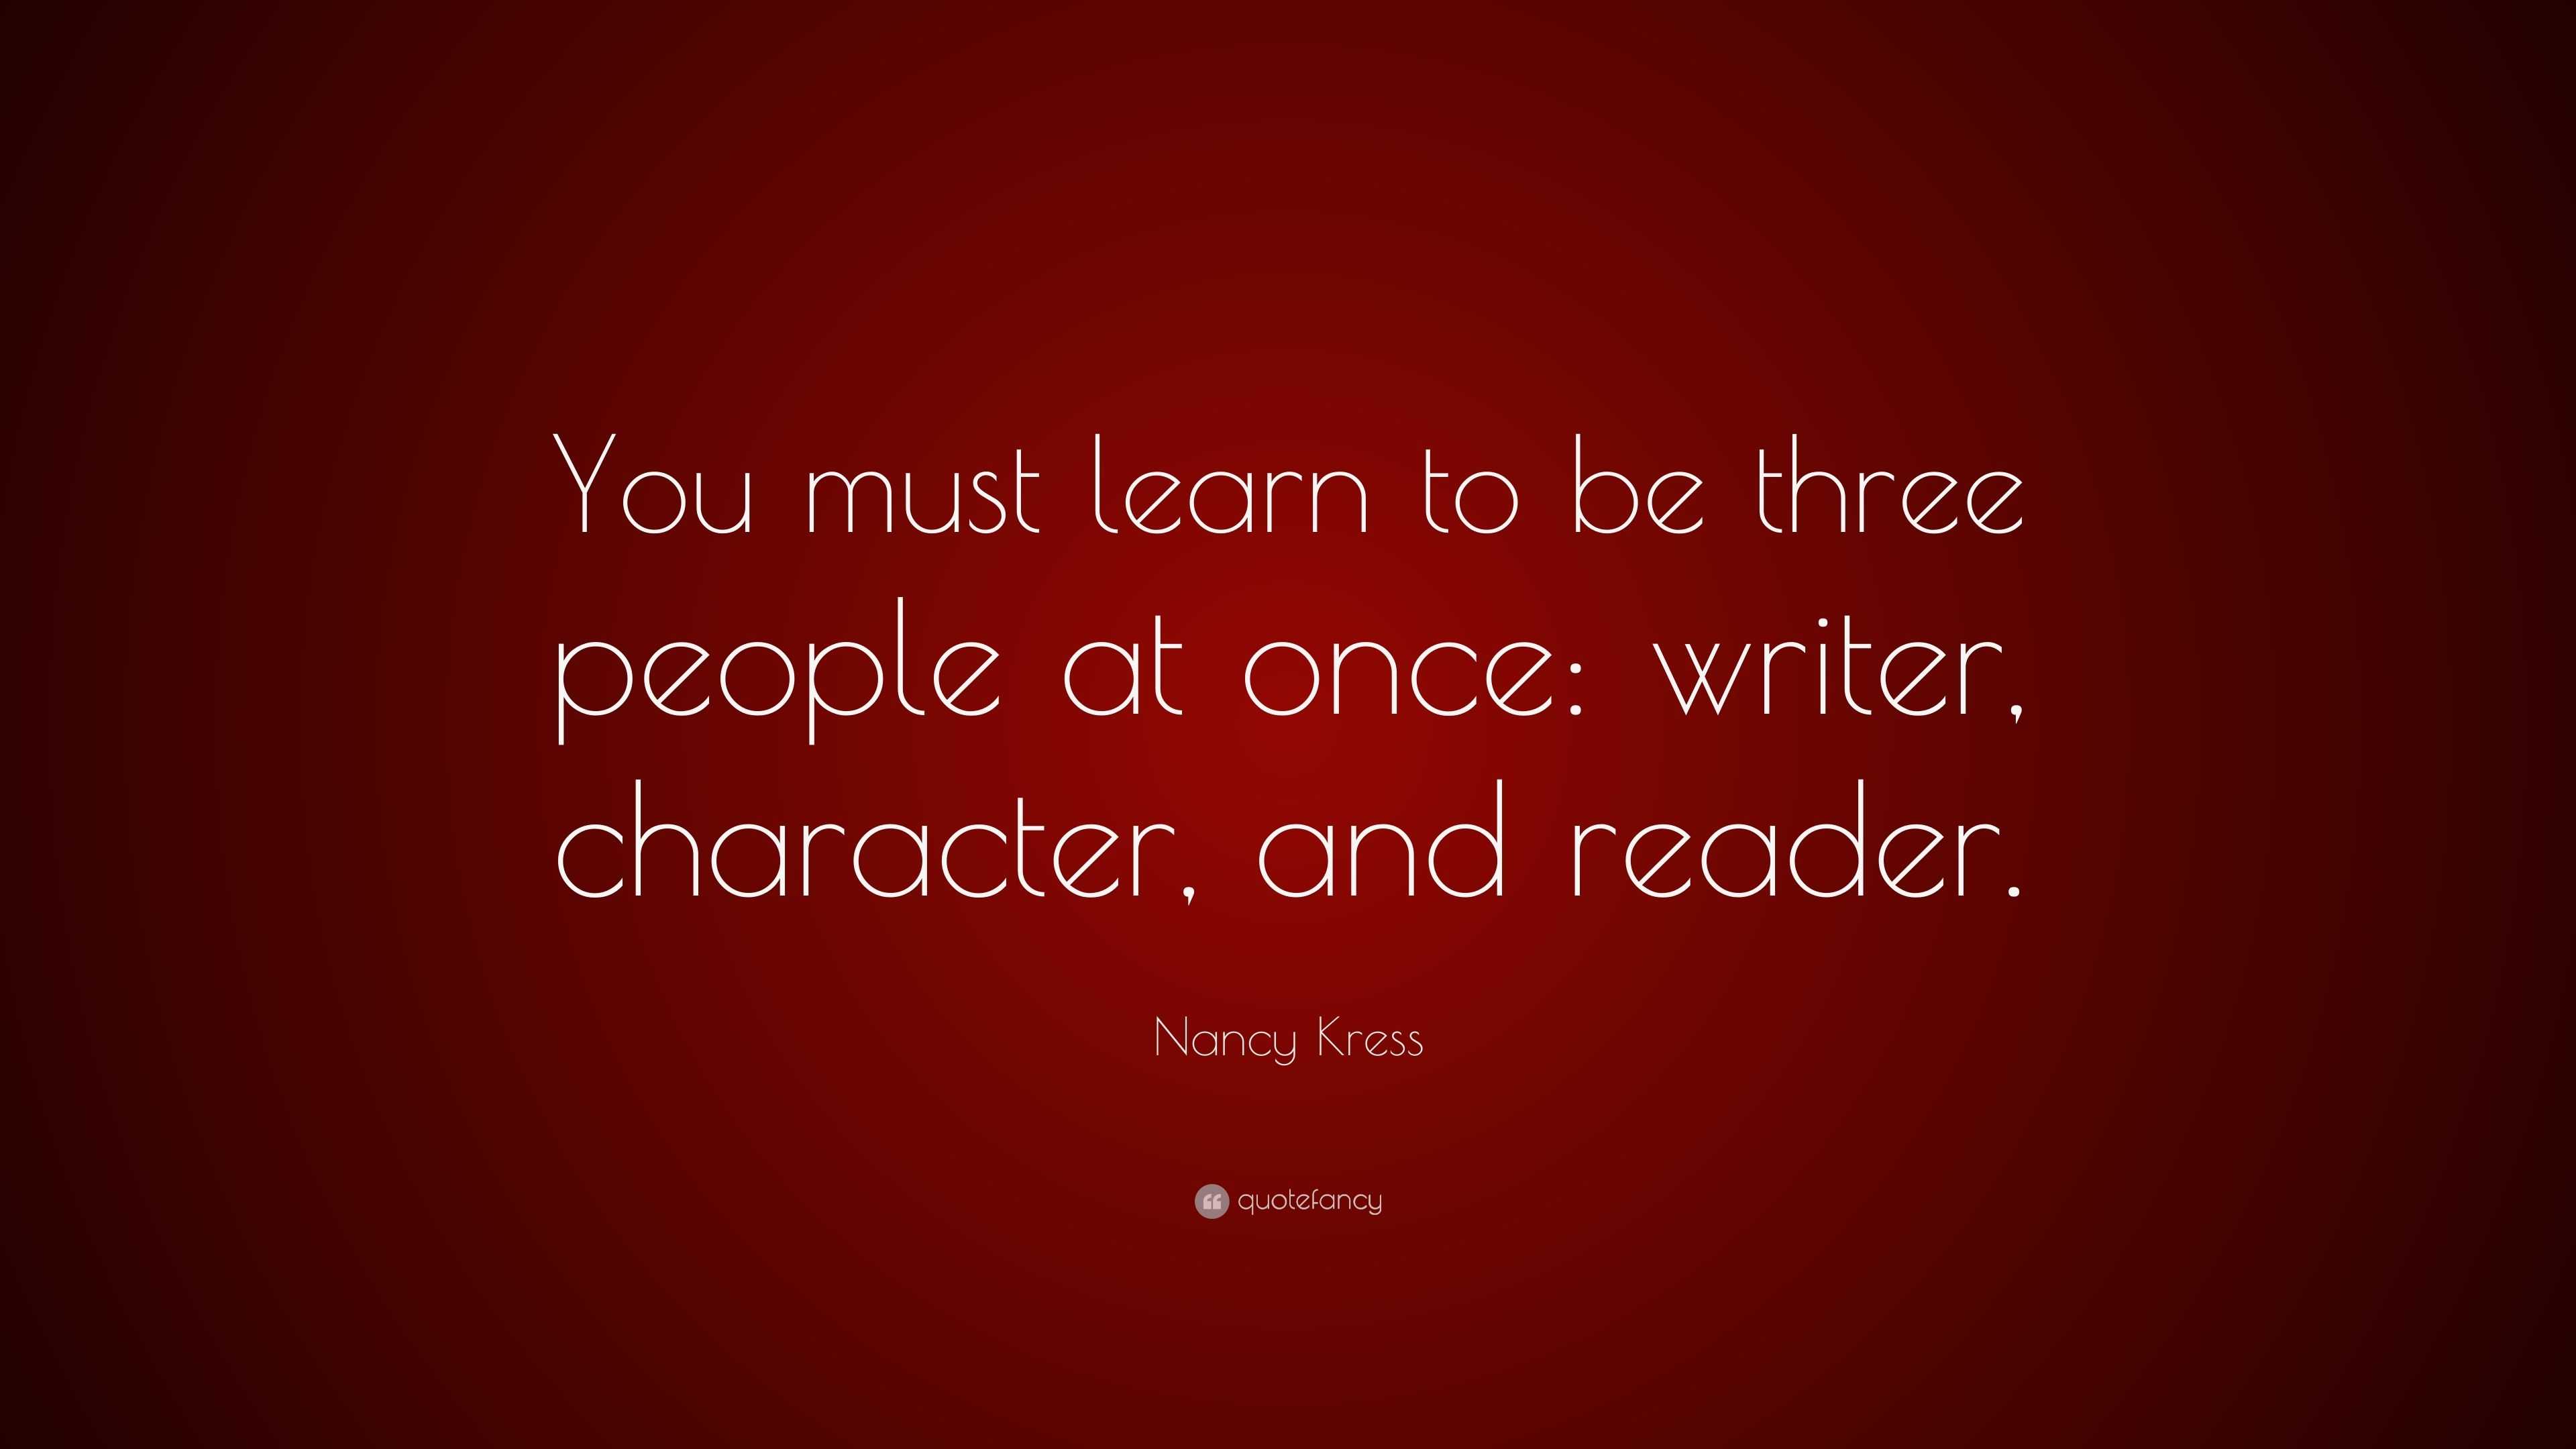 Nancy Kress Quote: “You must learn to be three people at once: writer ...